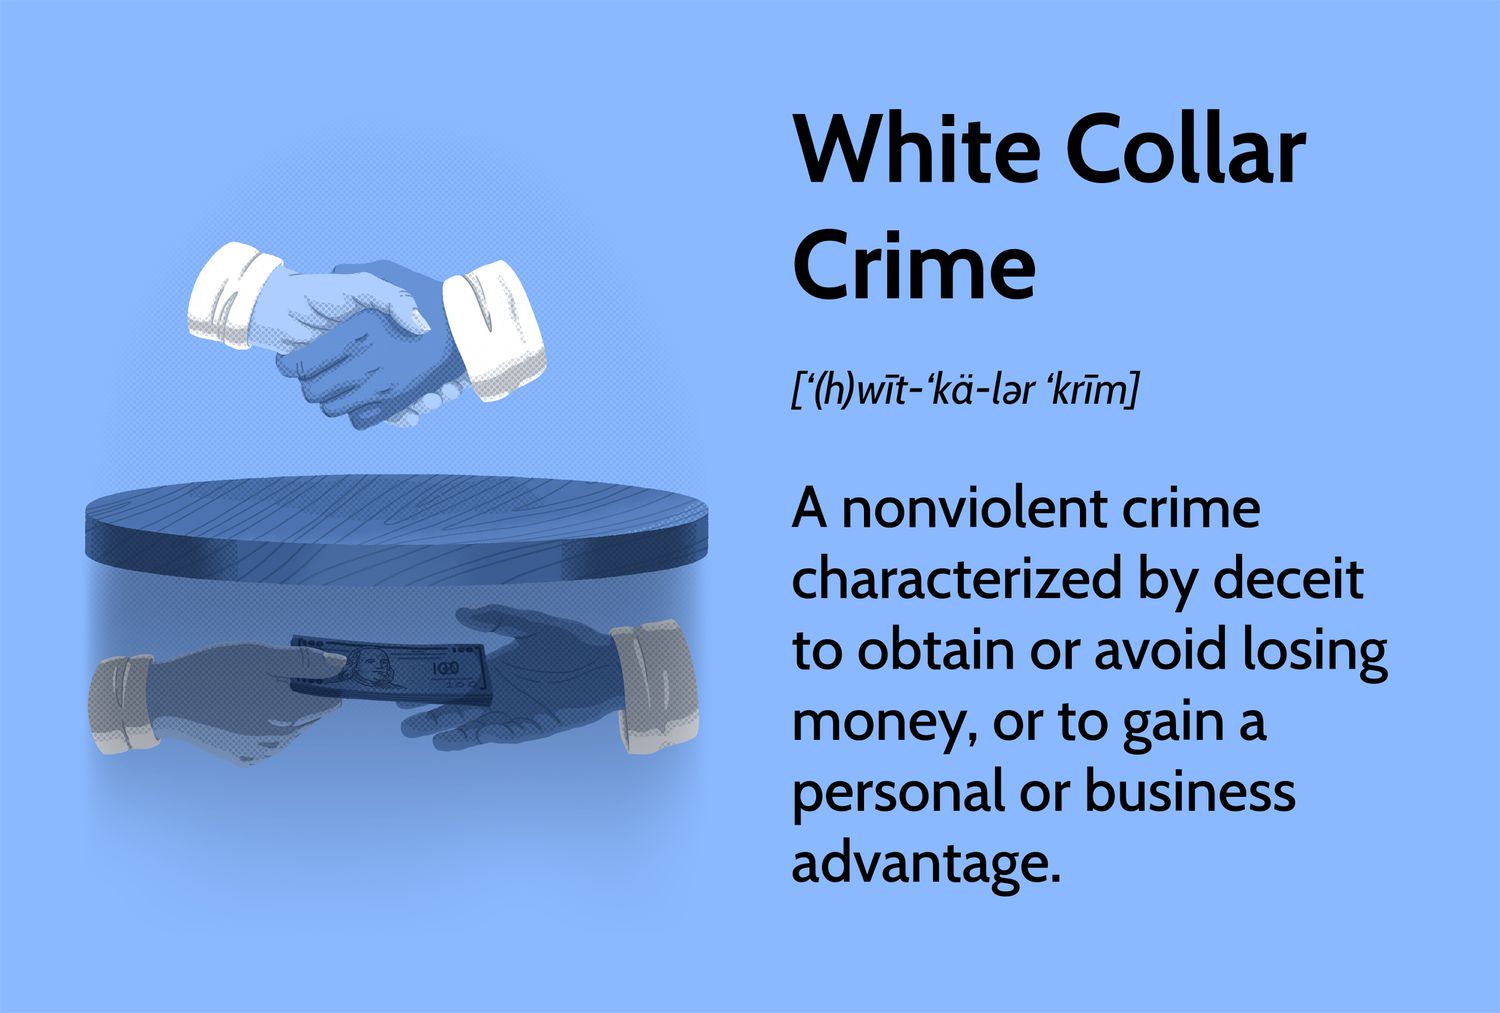 10 high profile white collar crimes that rocked the business world